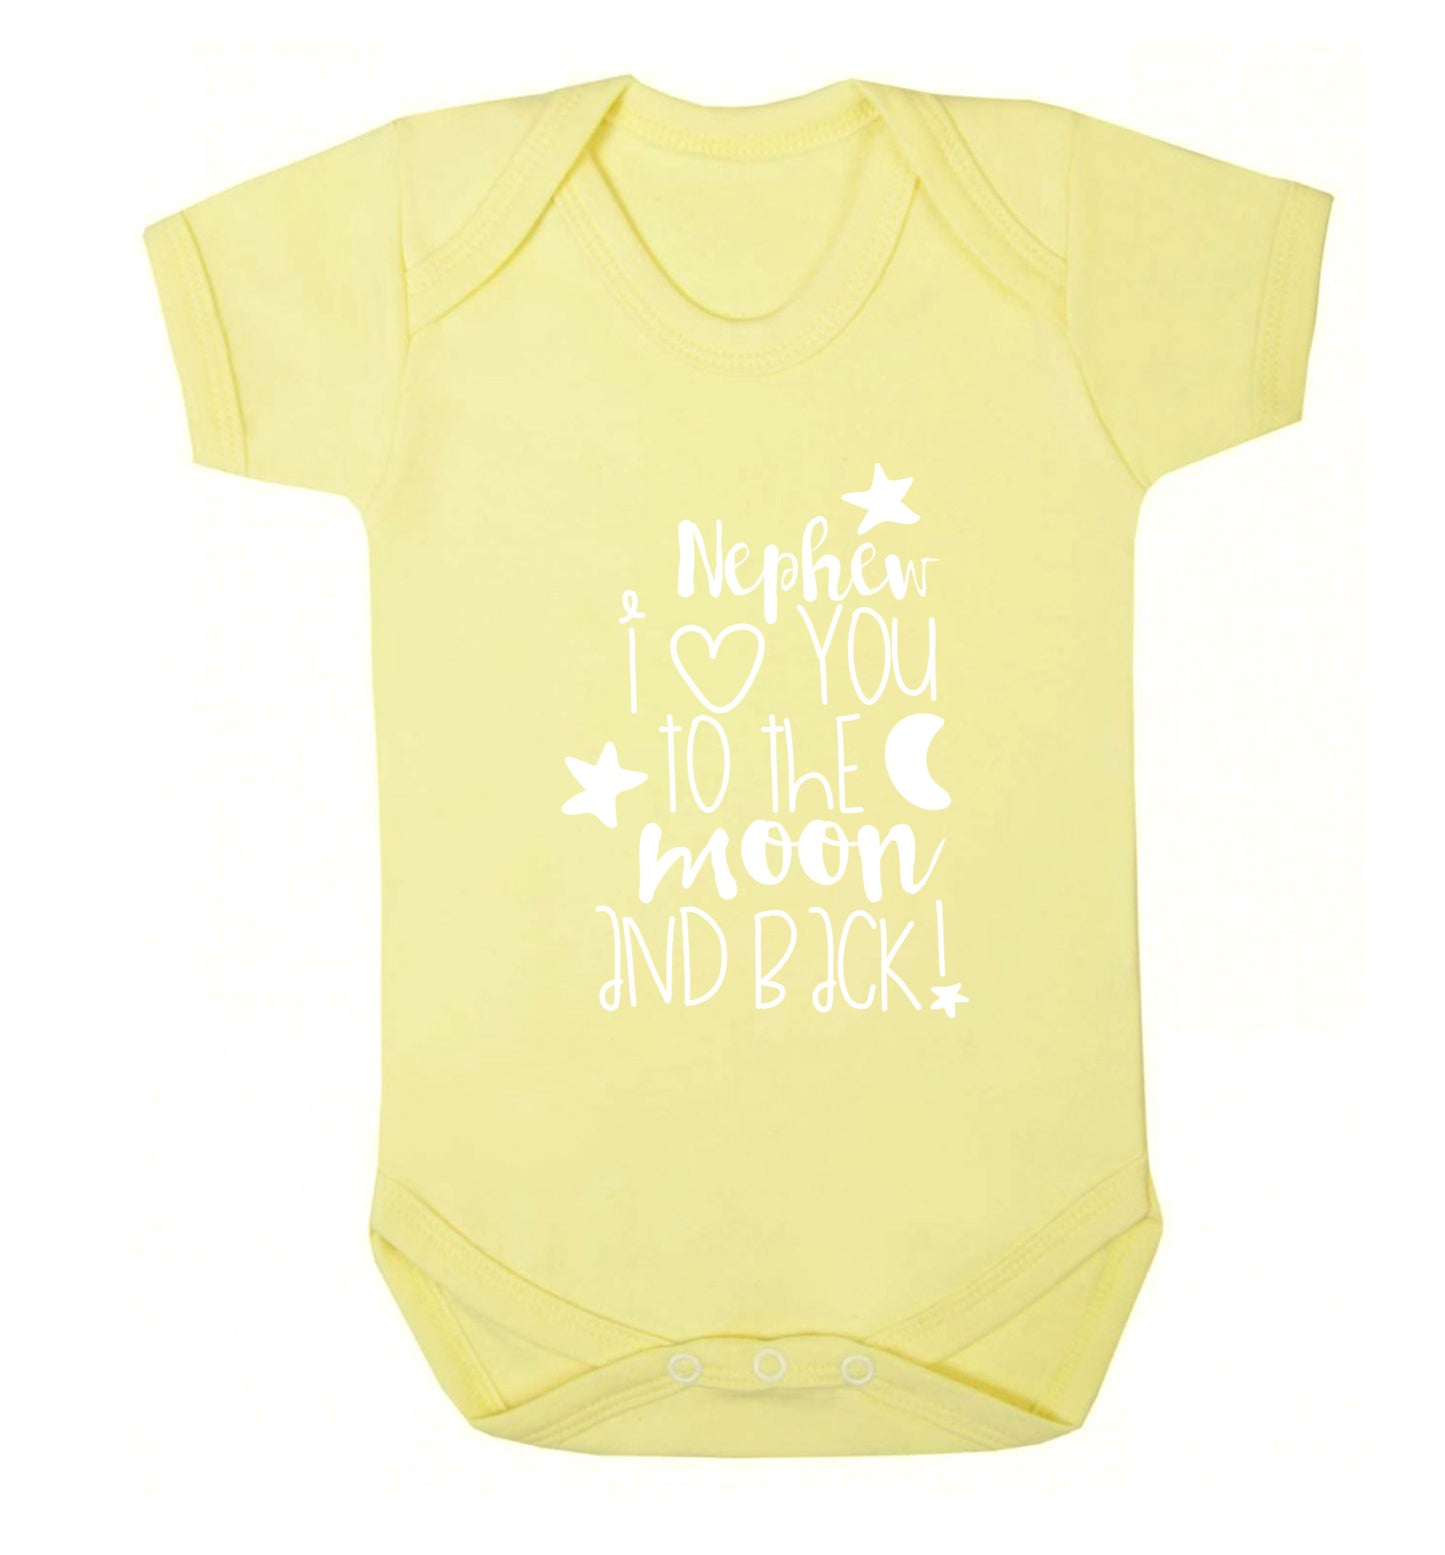 Nephew I love you to the moon and back Baby Vest pale yellow 18-24 months